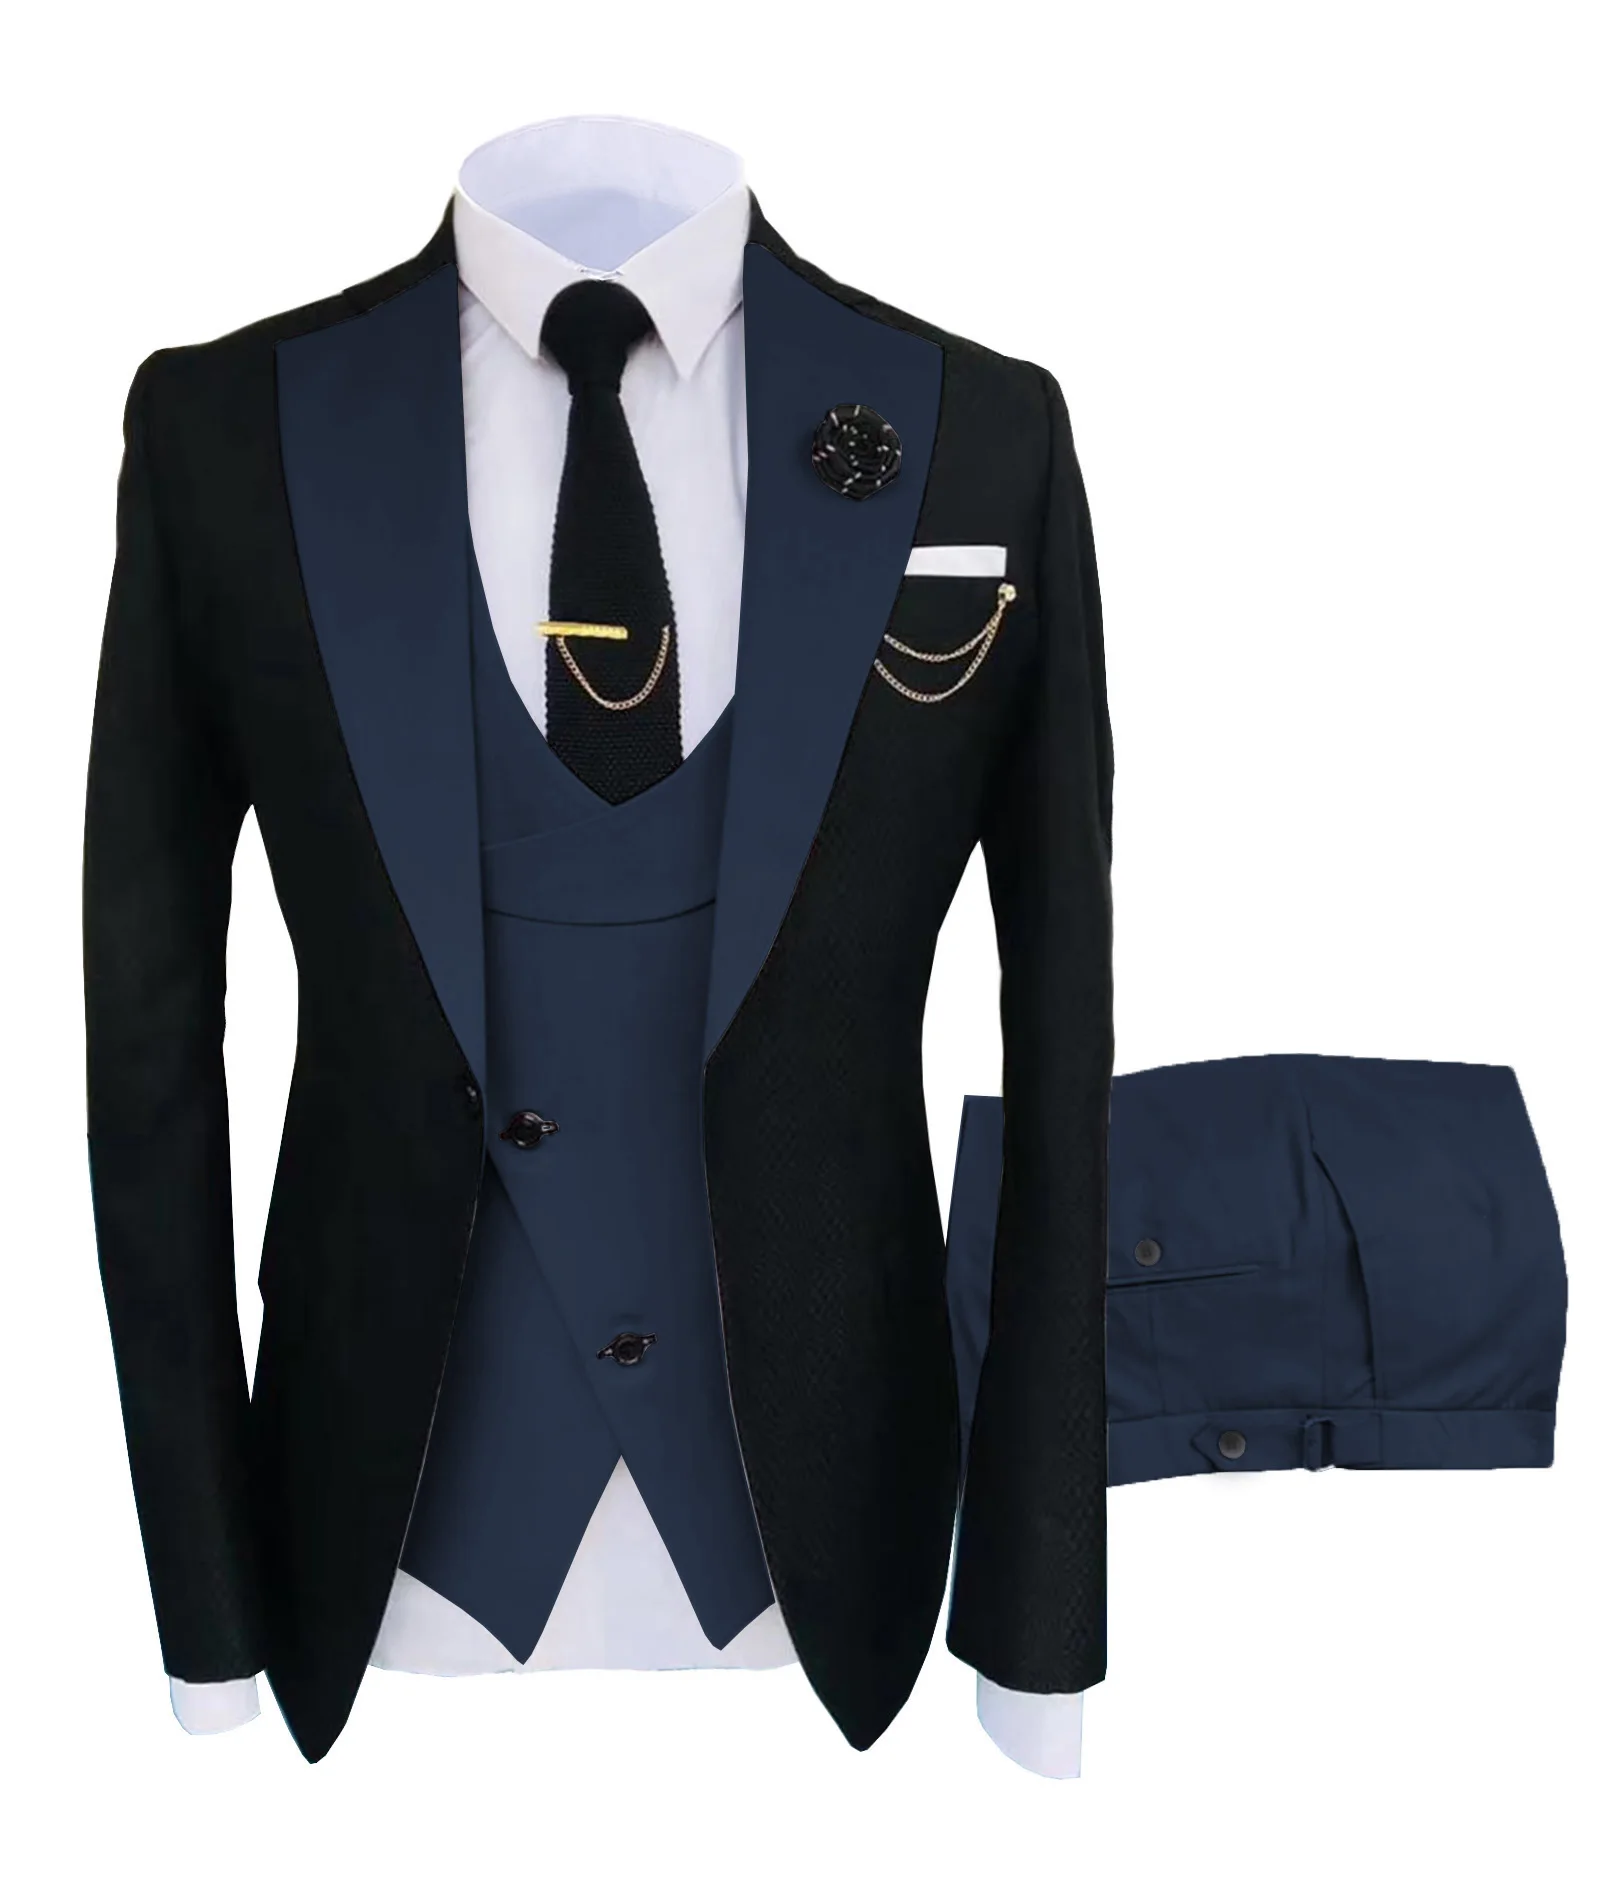 Navy Men Suits For Wedding Luxury Suits Groom Tuxedos Costume homme Terno Masculino Custom Made Three Pieces(Blazer+Vest+Pants)